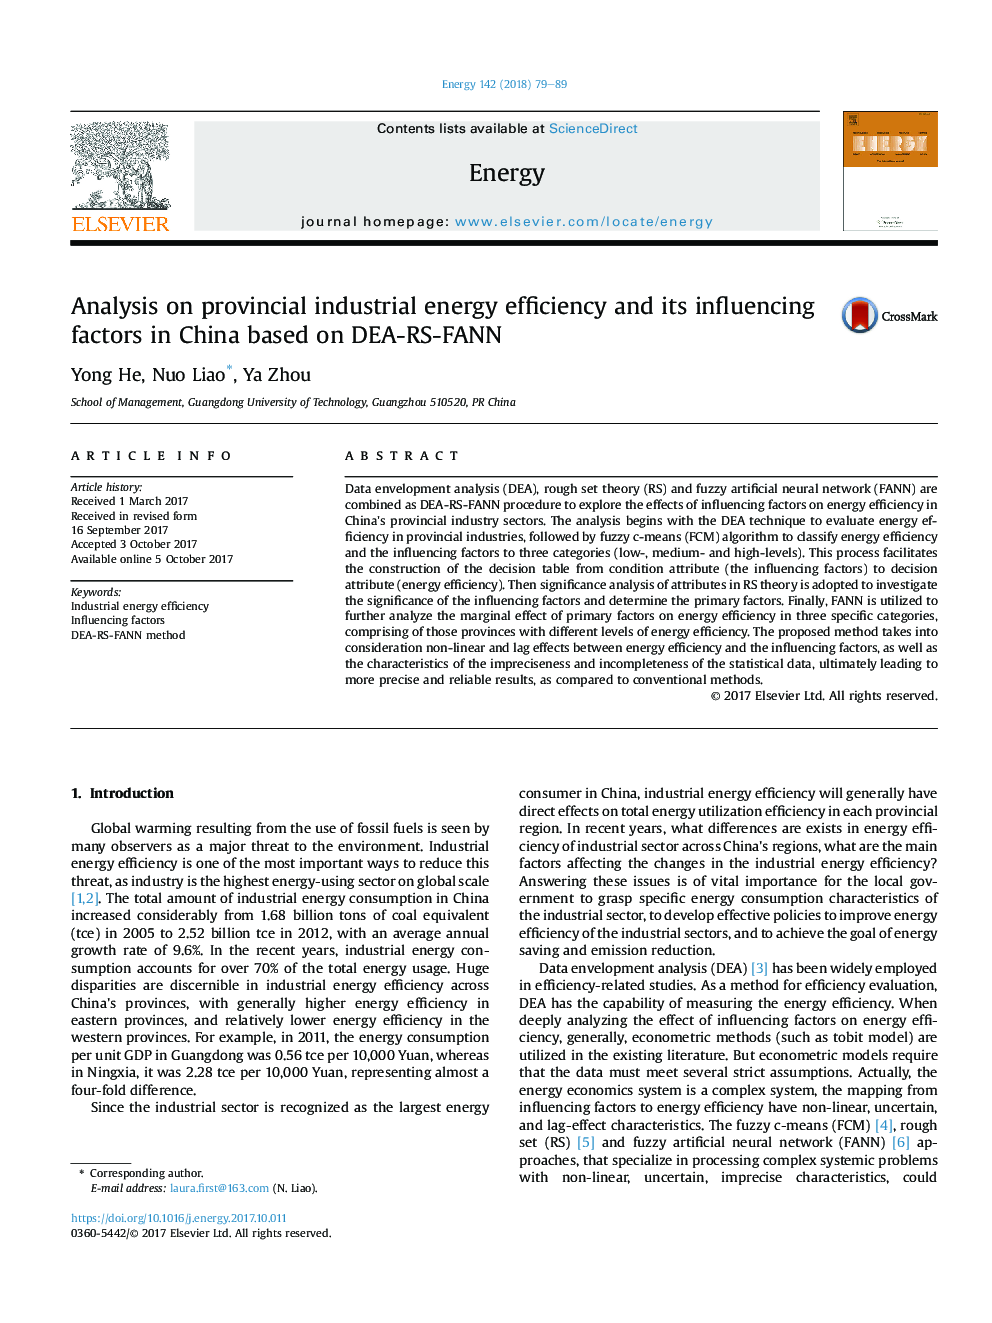 Analysis on provincial industrial energy efficiency and its influencing factors in China based on DEA-RS-FANN